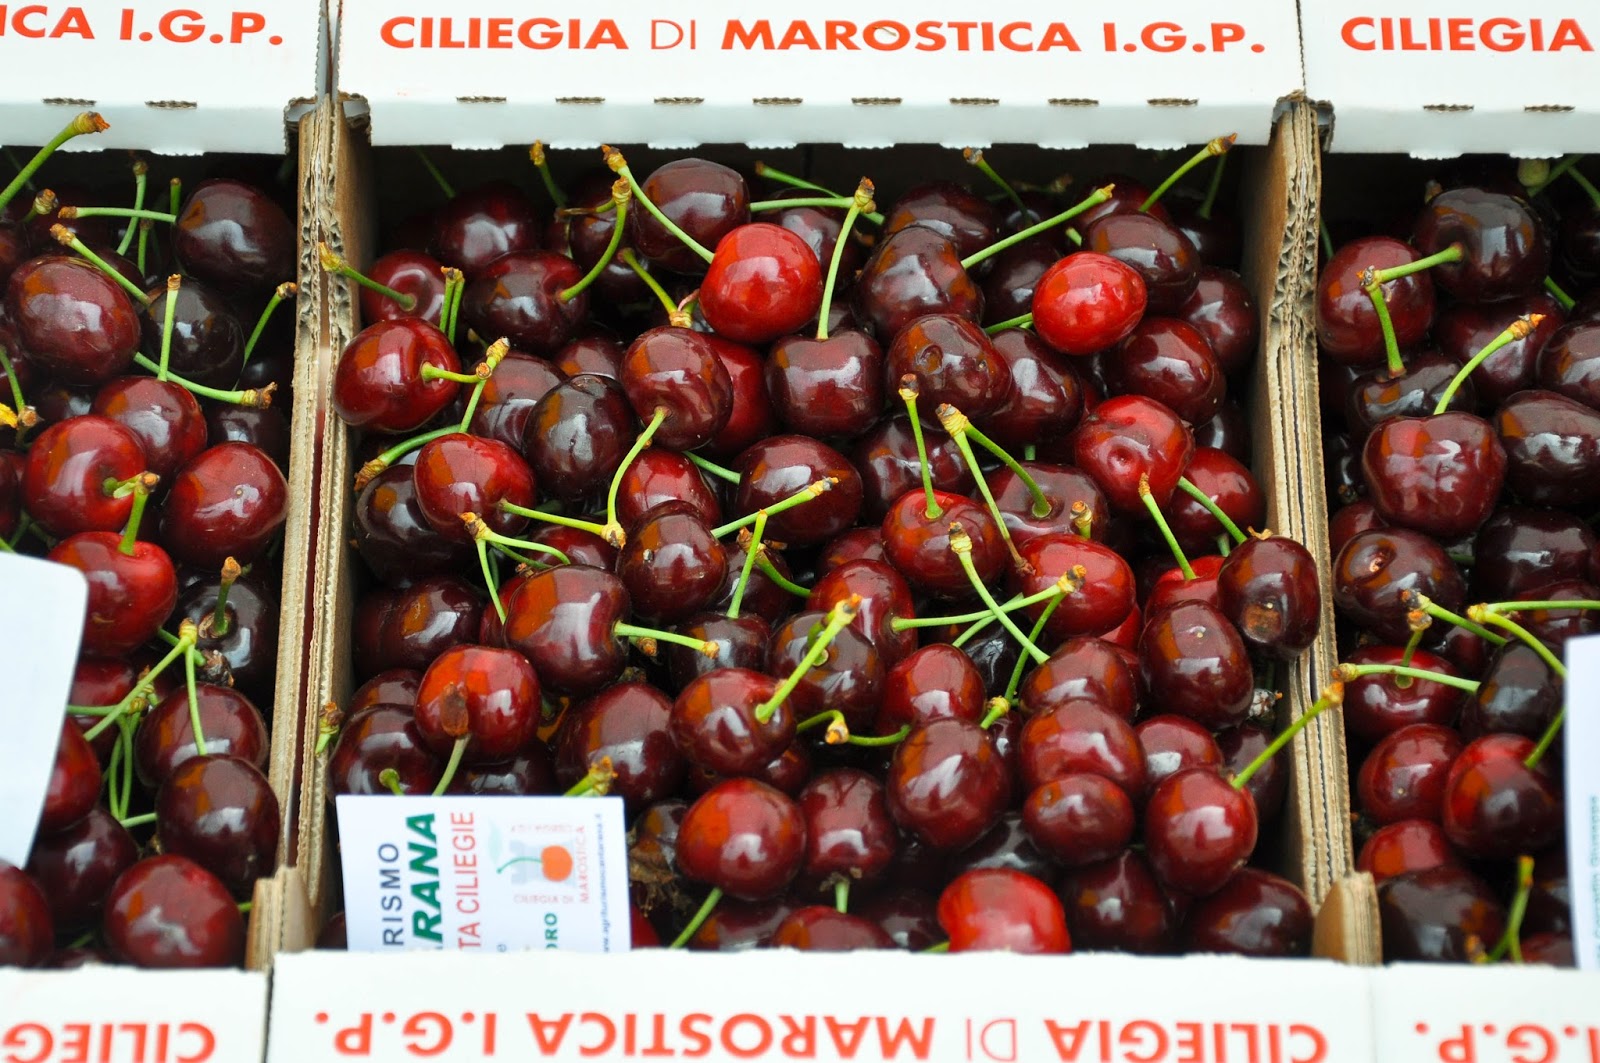 Cherries from Marostica at the Cherry Show Market in Marostica, Veneto, Italy